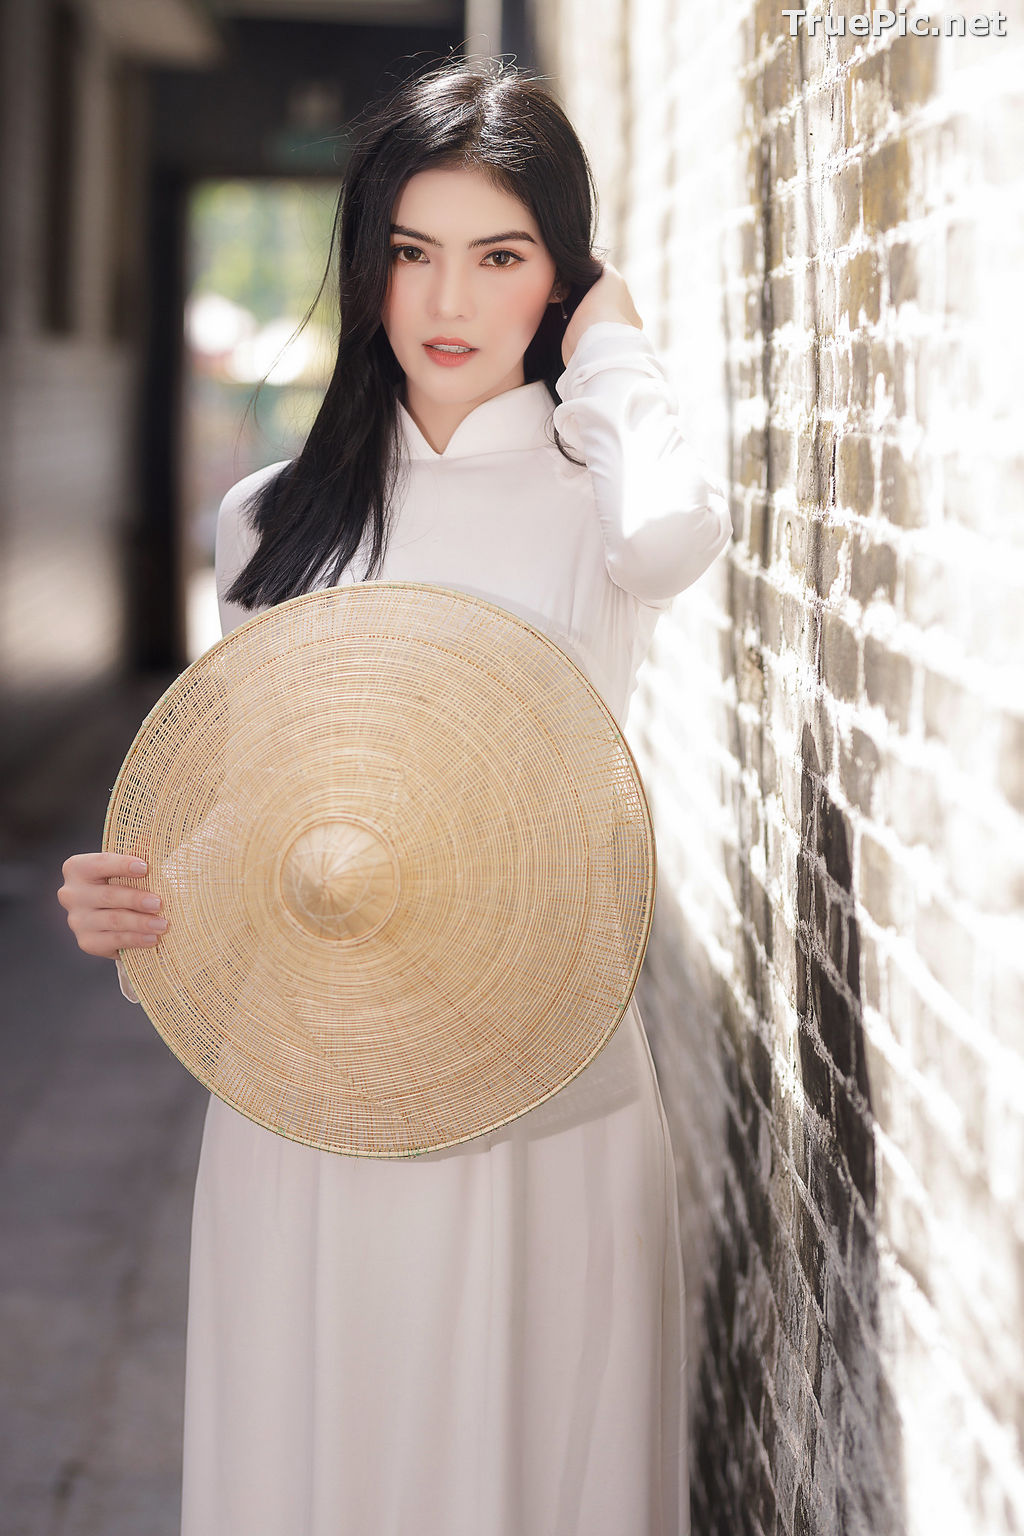 Image The Beauty of Vietnamese Girls with Traditional Dress (Ao Dai) #2 - TruePic.net - Picture-56